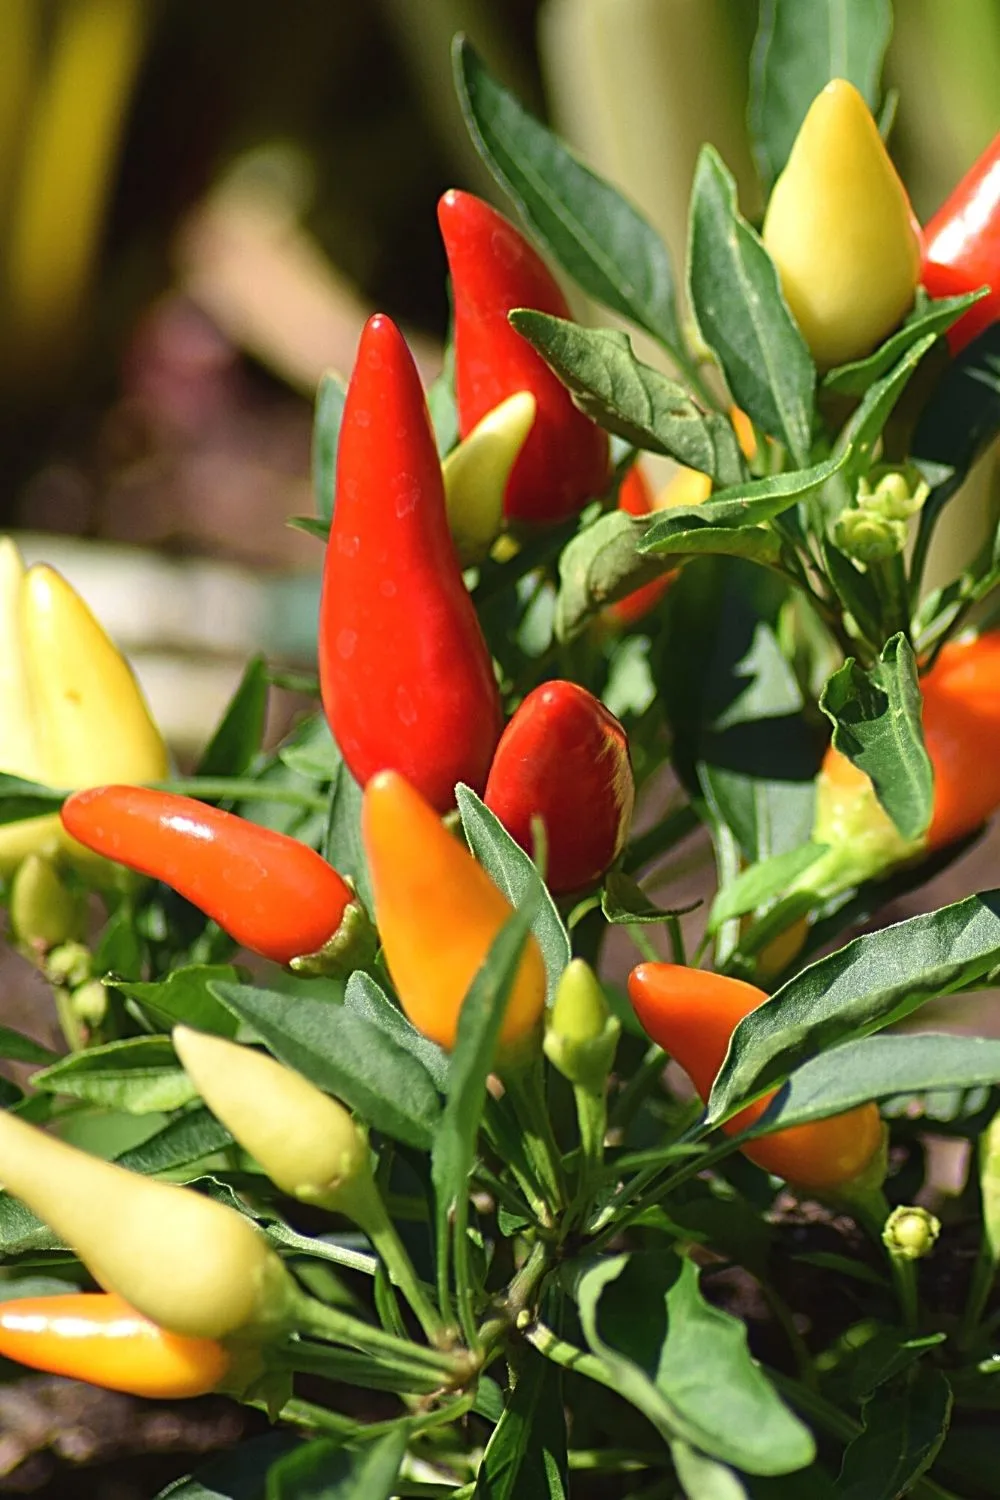 If you want to grow spices on your south-facing balcony, start with Pepper